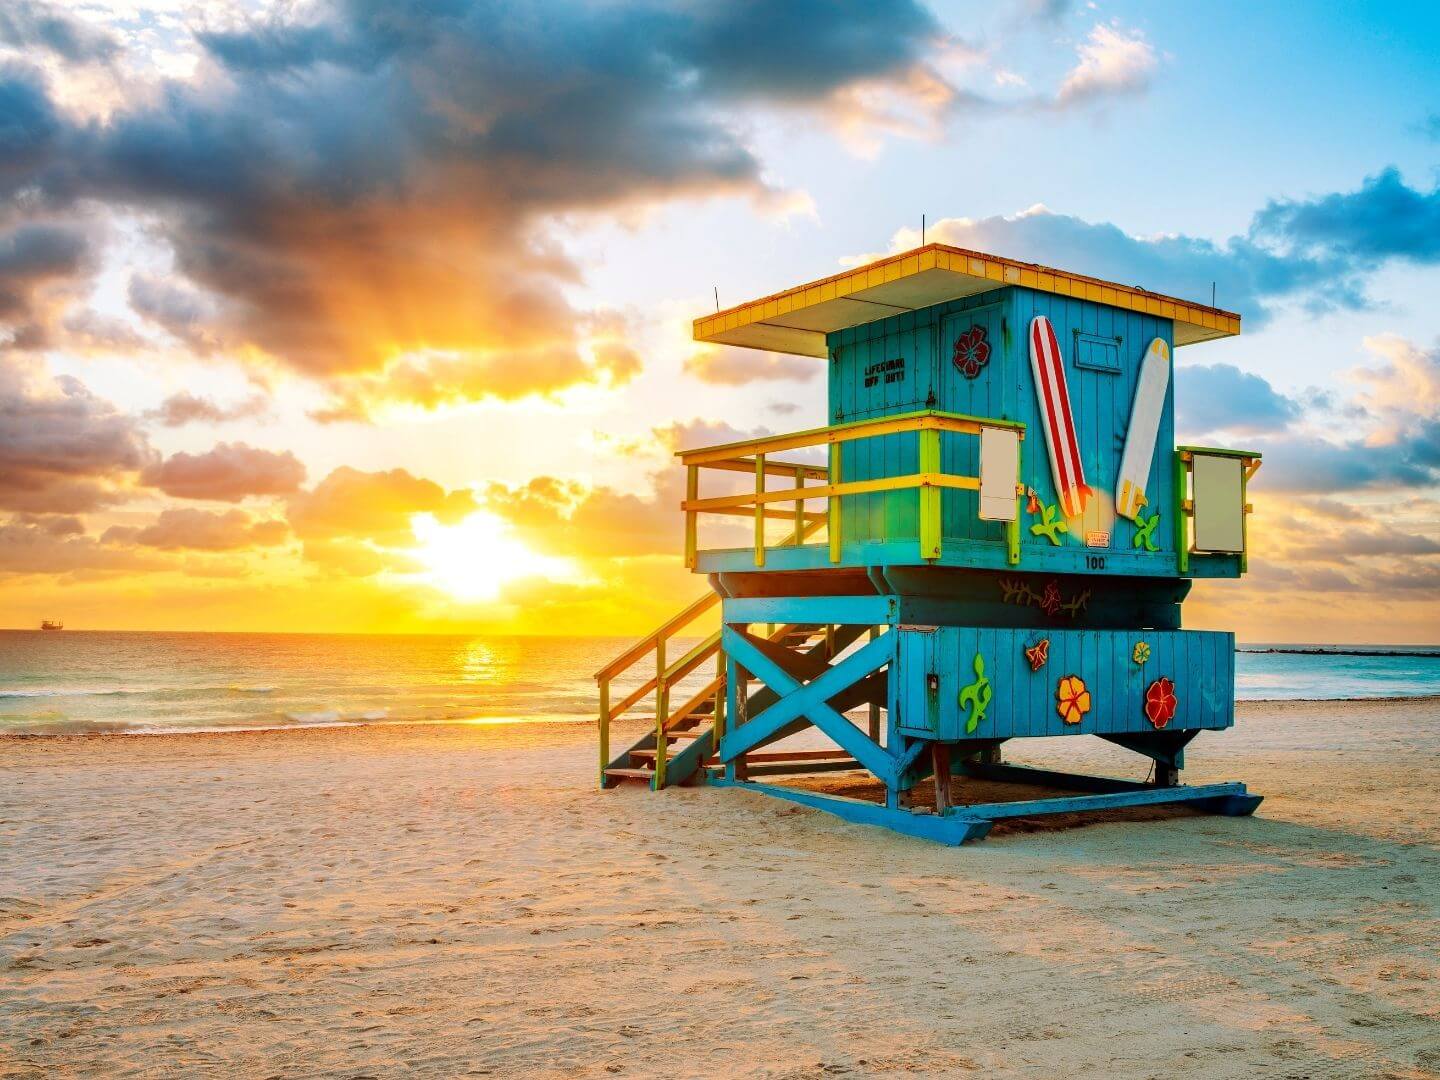 South Florida: 15 Exciting Activities from Palm Beach to Miami